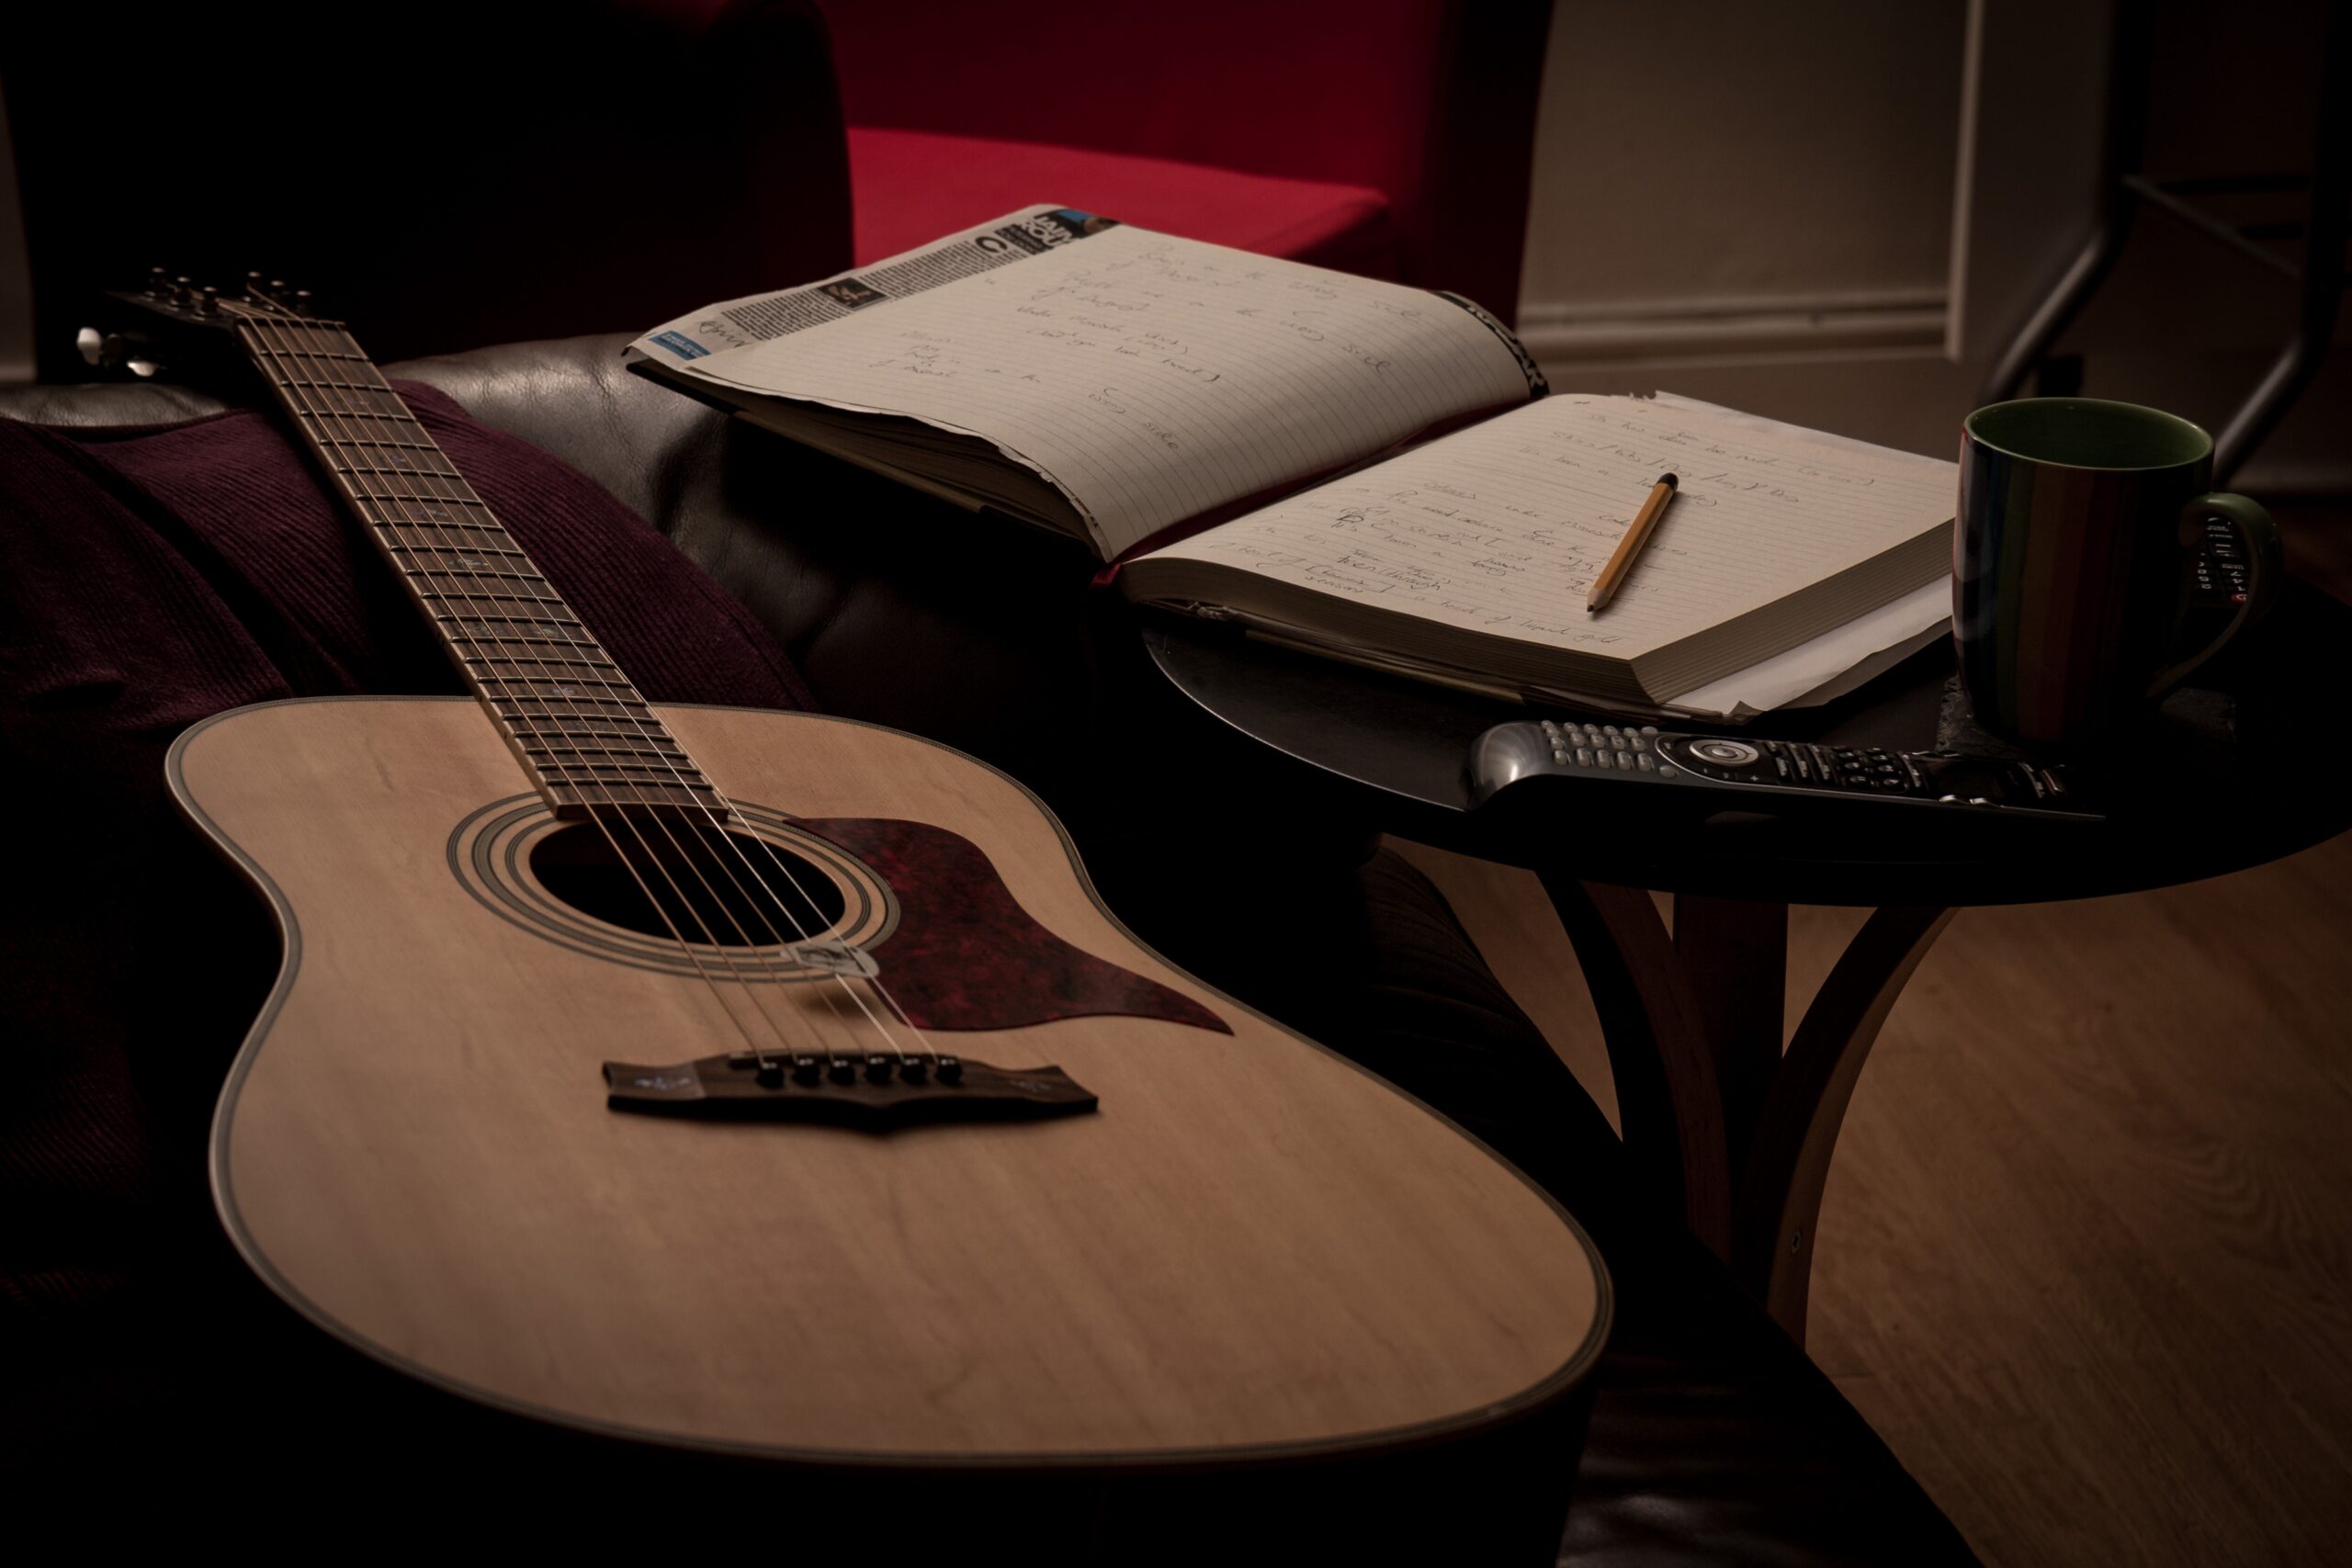 The tools of songwriting - a guitar, paper and pen